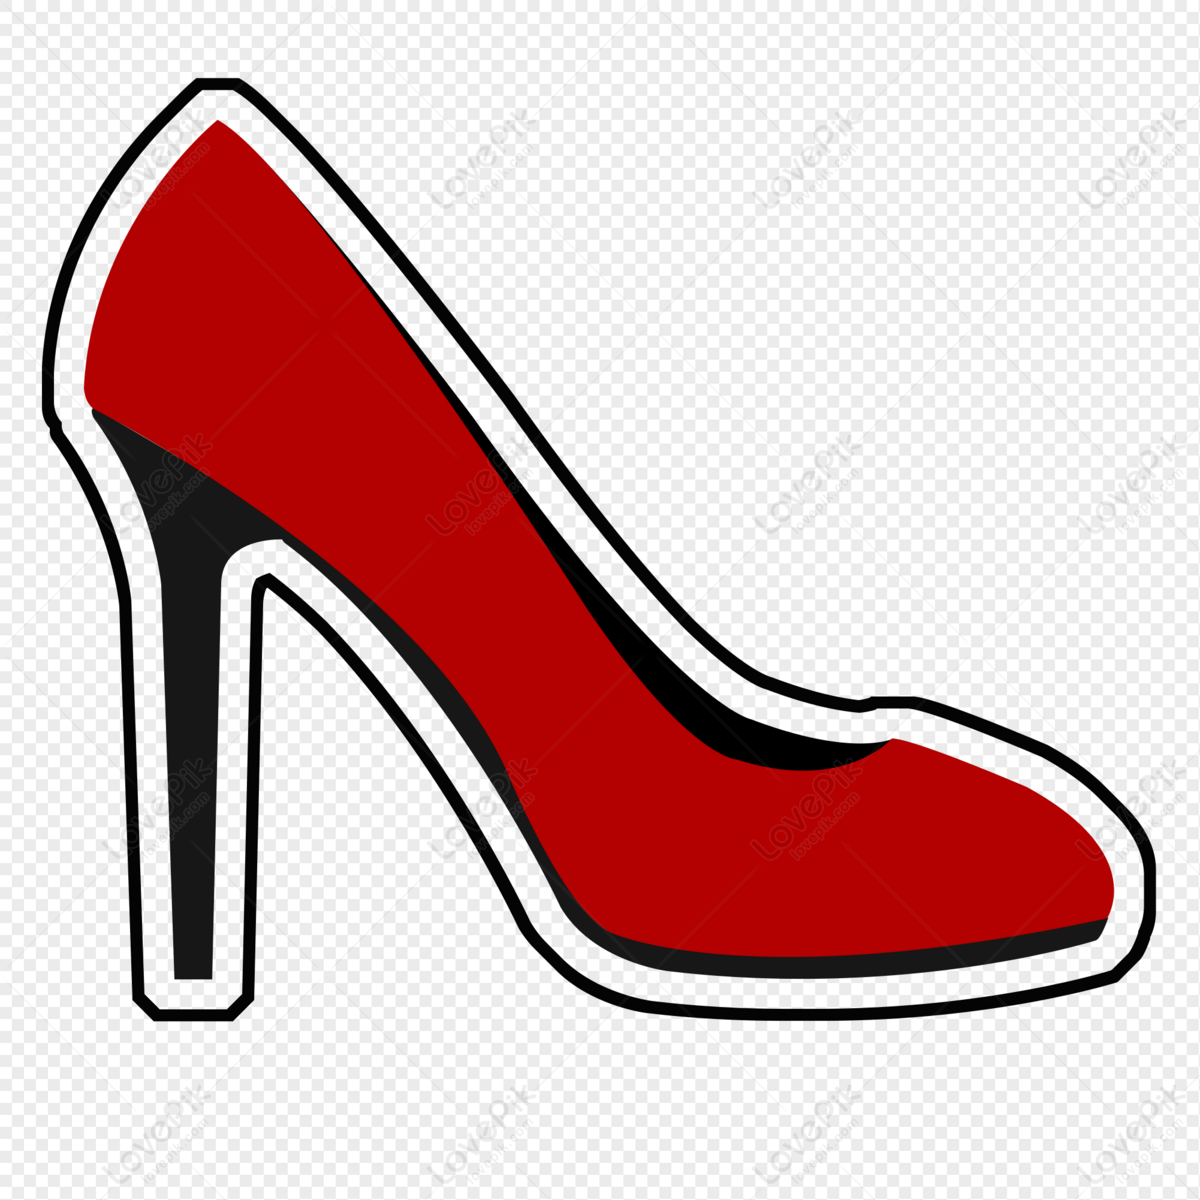 High Heels PNG Free Download And Clipart Image For Free Download - Lovepik  | 401248683